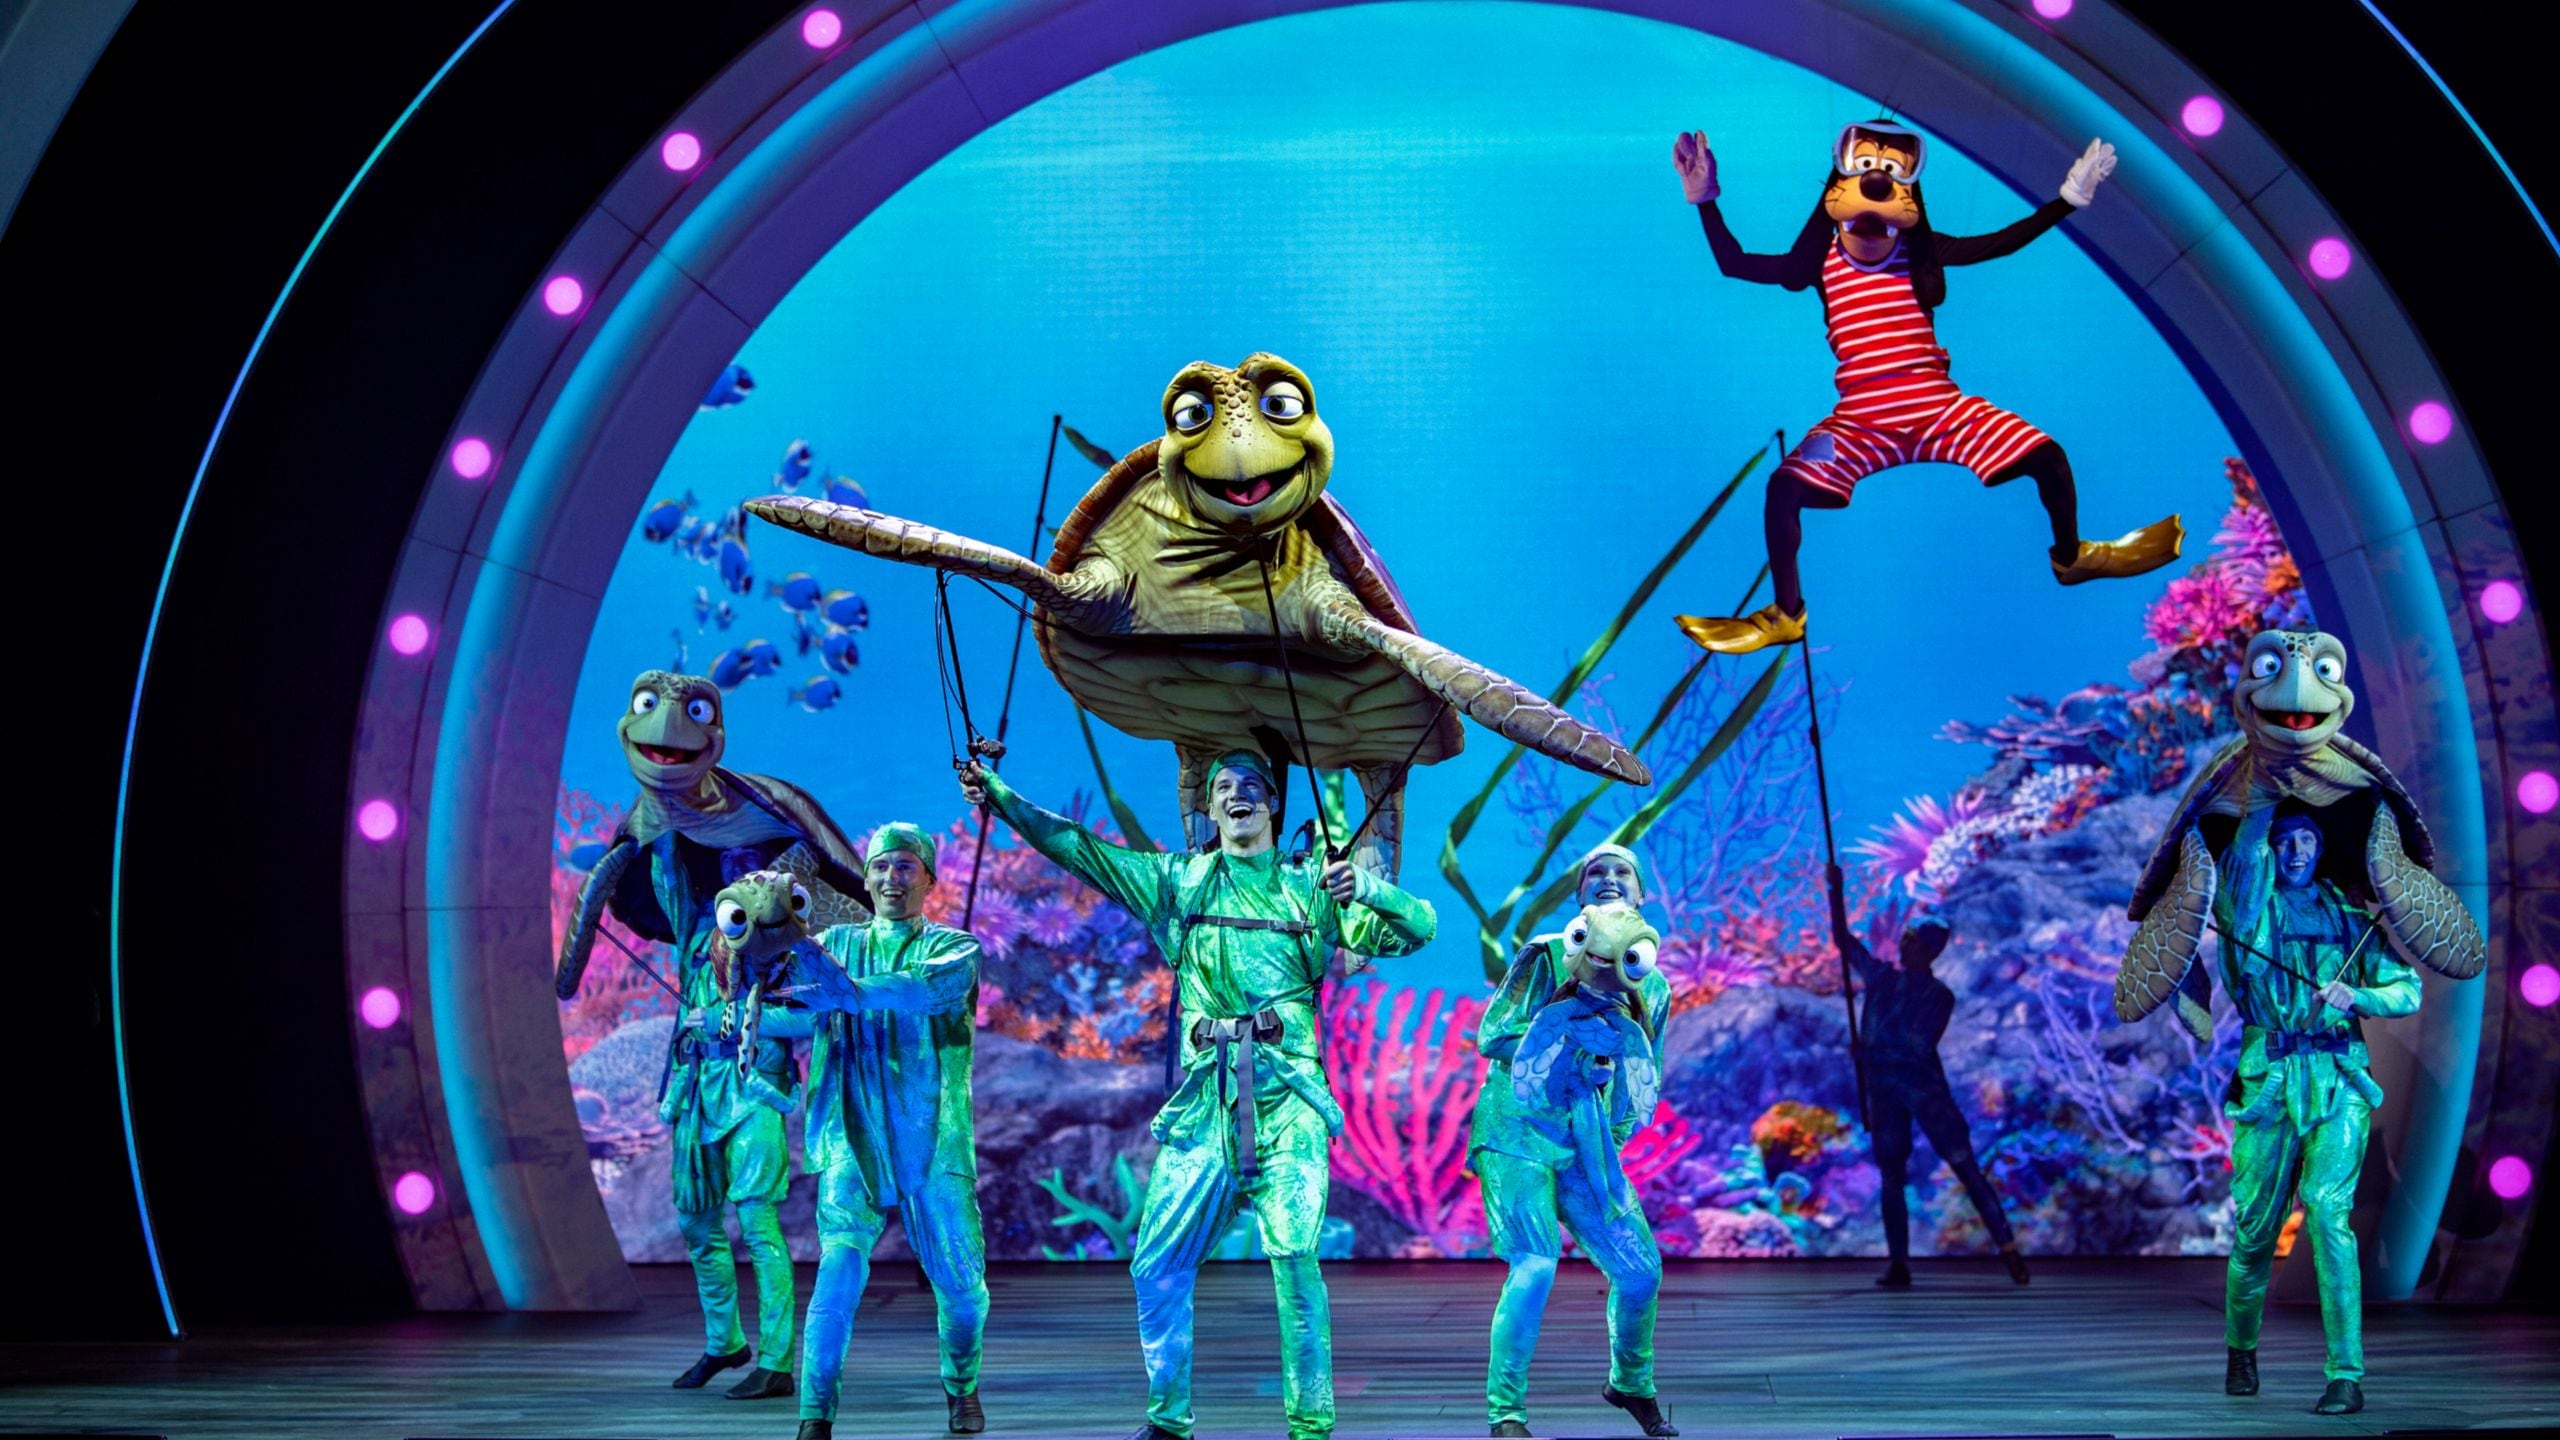 A 'Finding Nemo' stage show with sea turtle puppets and Goofy